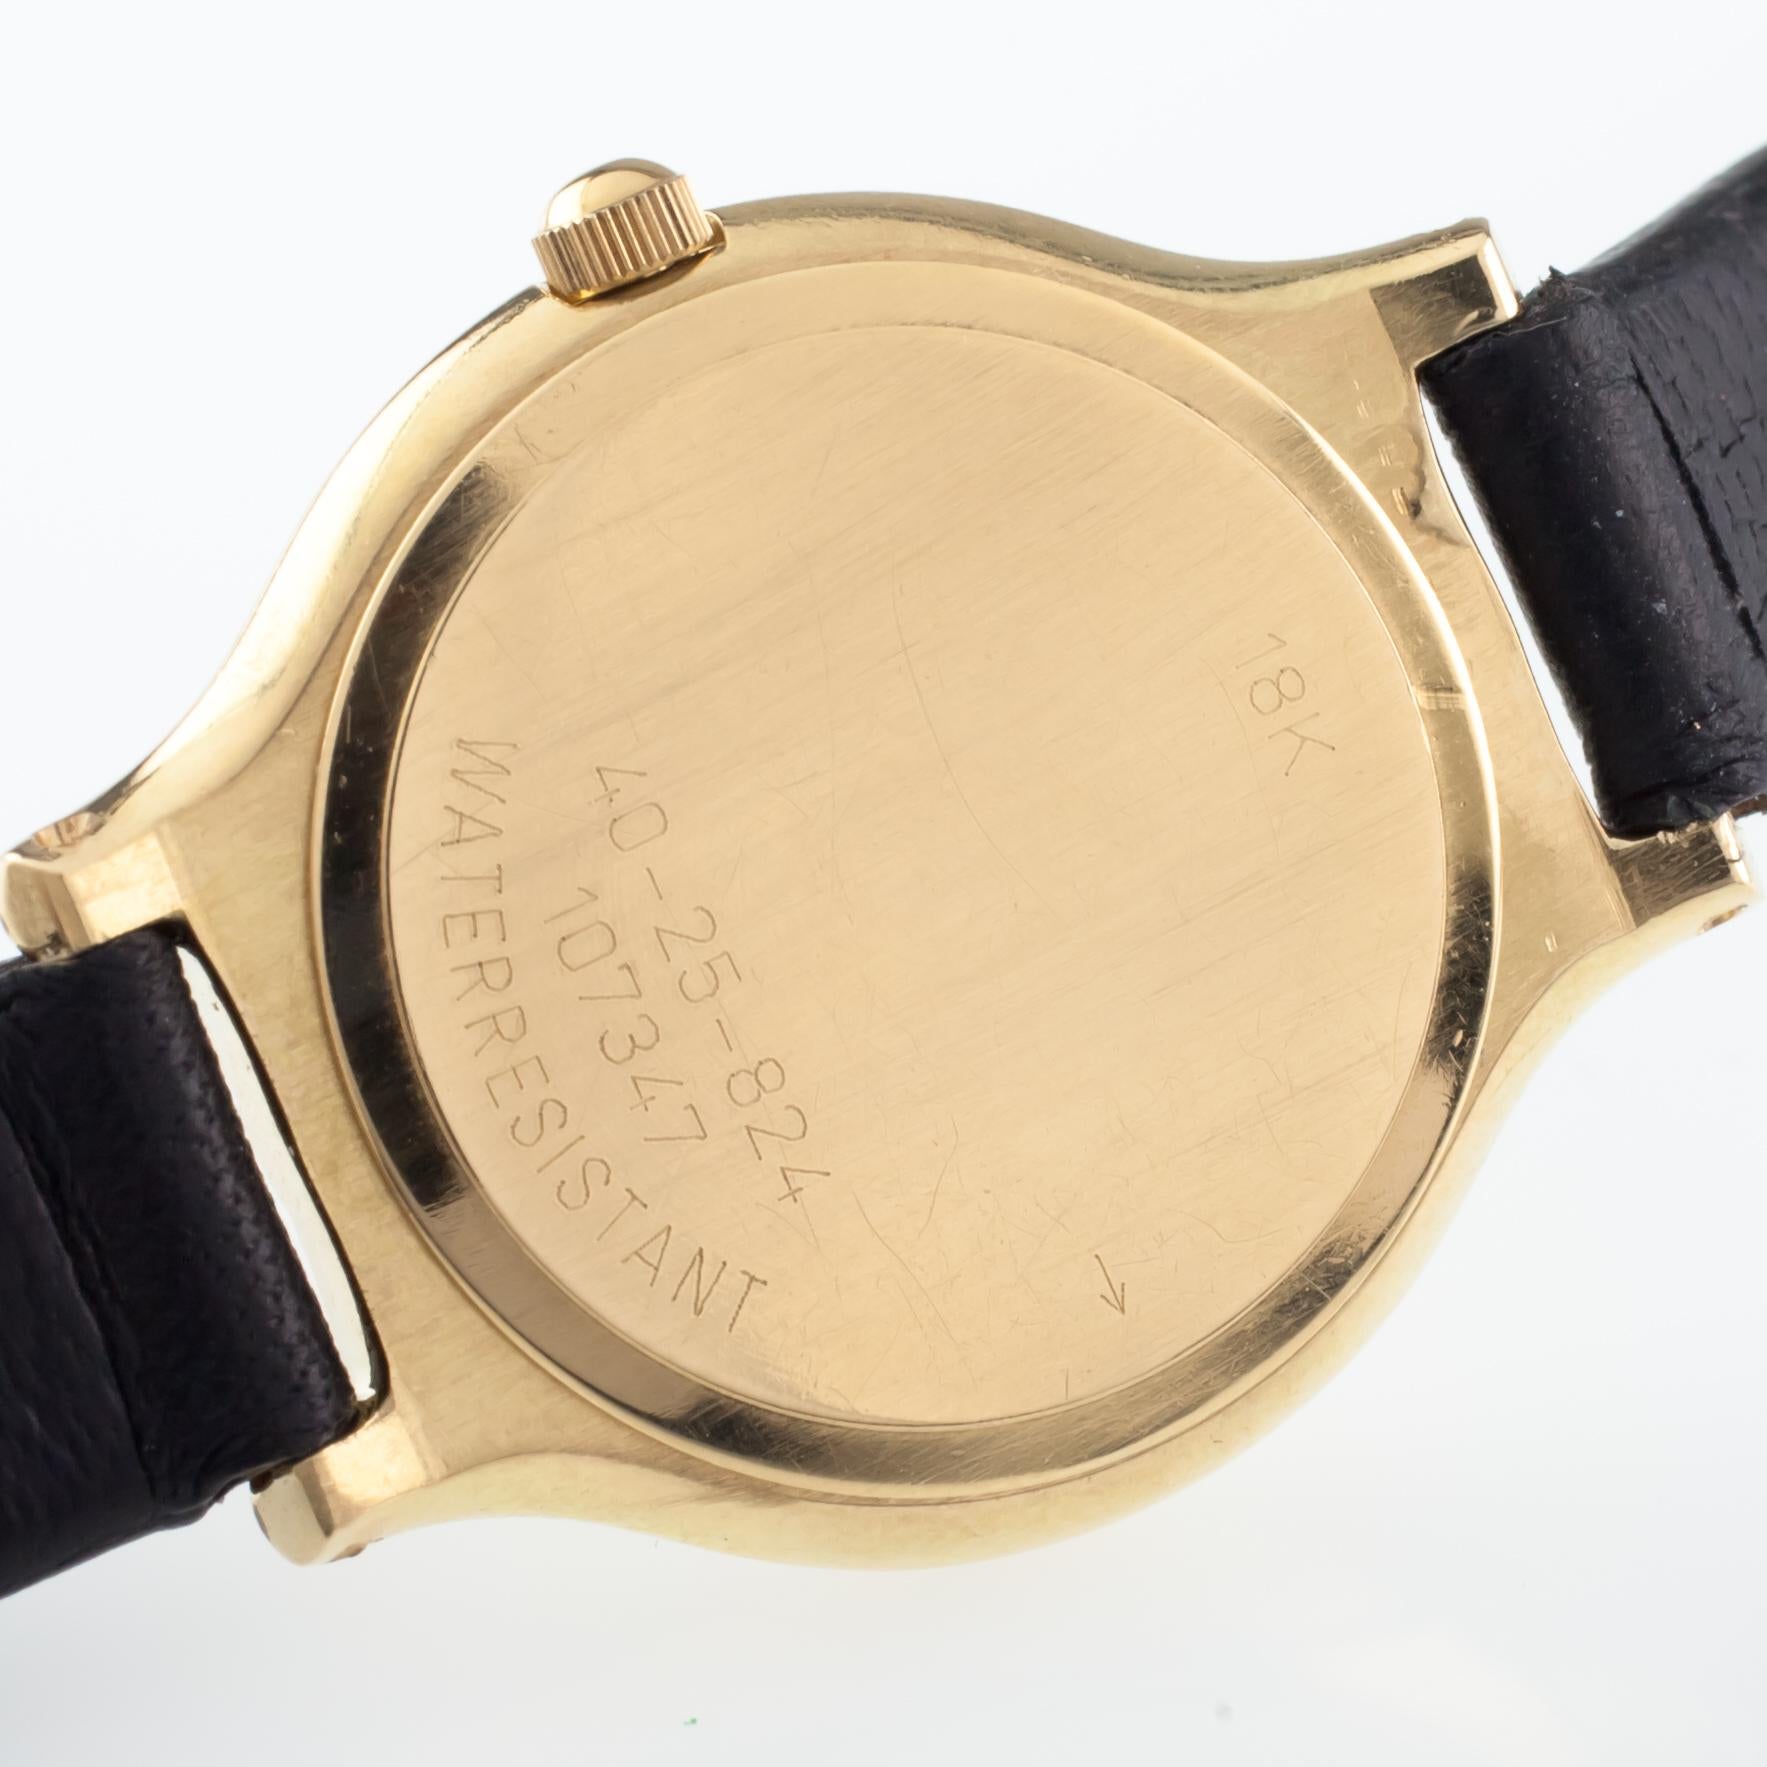 18k Yellow Gold Movado Women's Quartz Watch w/ Black Leather Band Nice In Good Condition For Sale In Sherman Oaks, CA